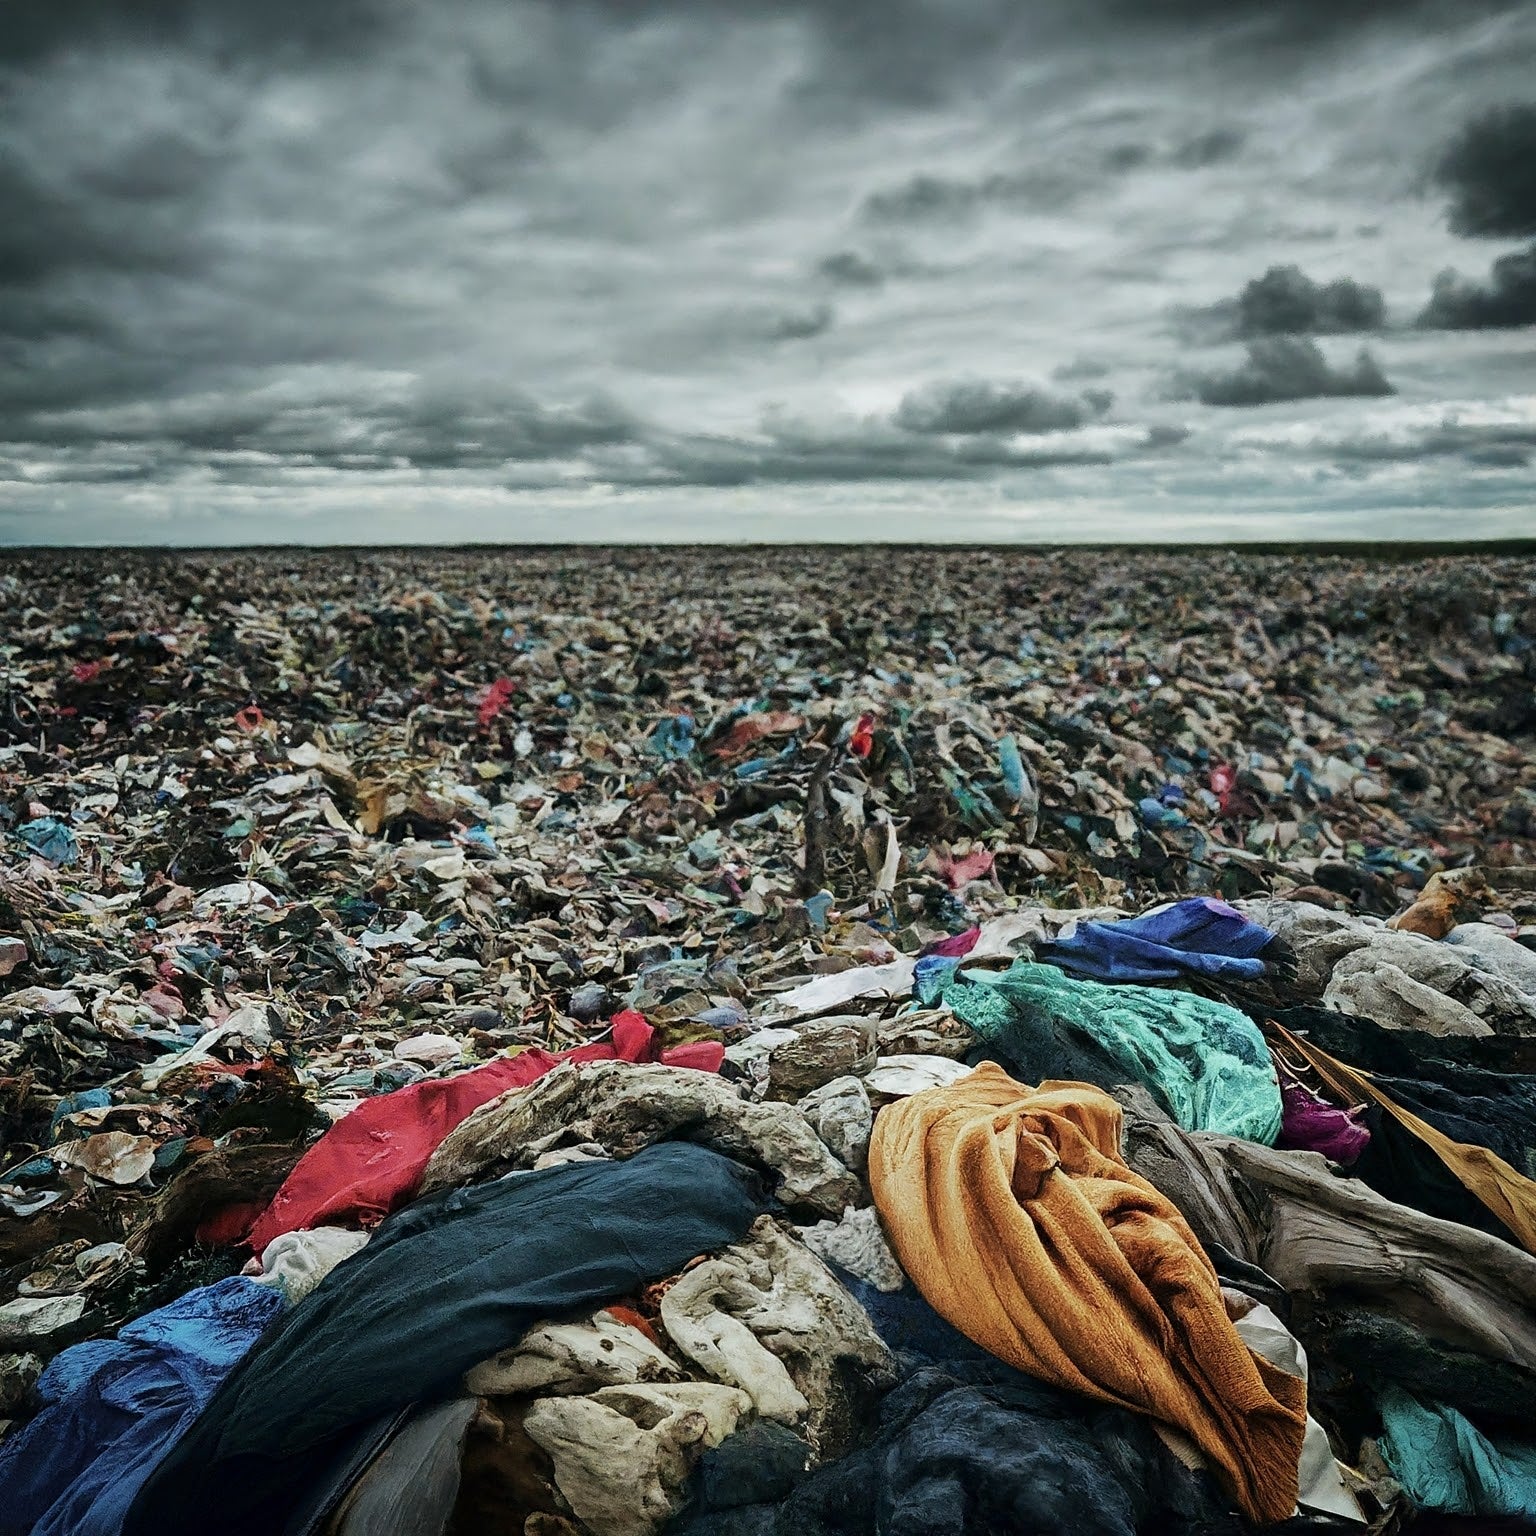 Did you know 85% of All Rejected Clothing Ends Up In The Landfill Or Incinerated